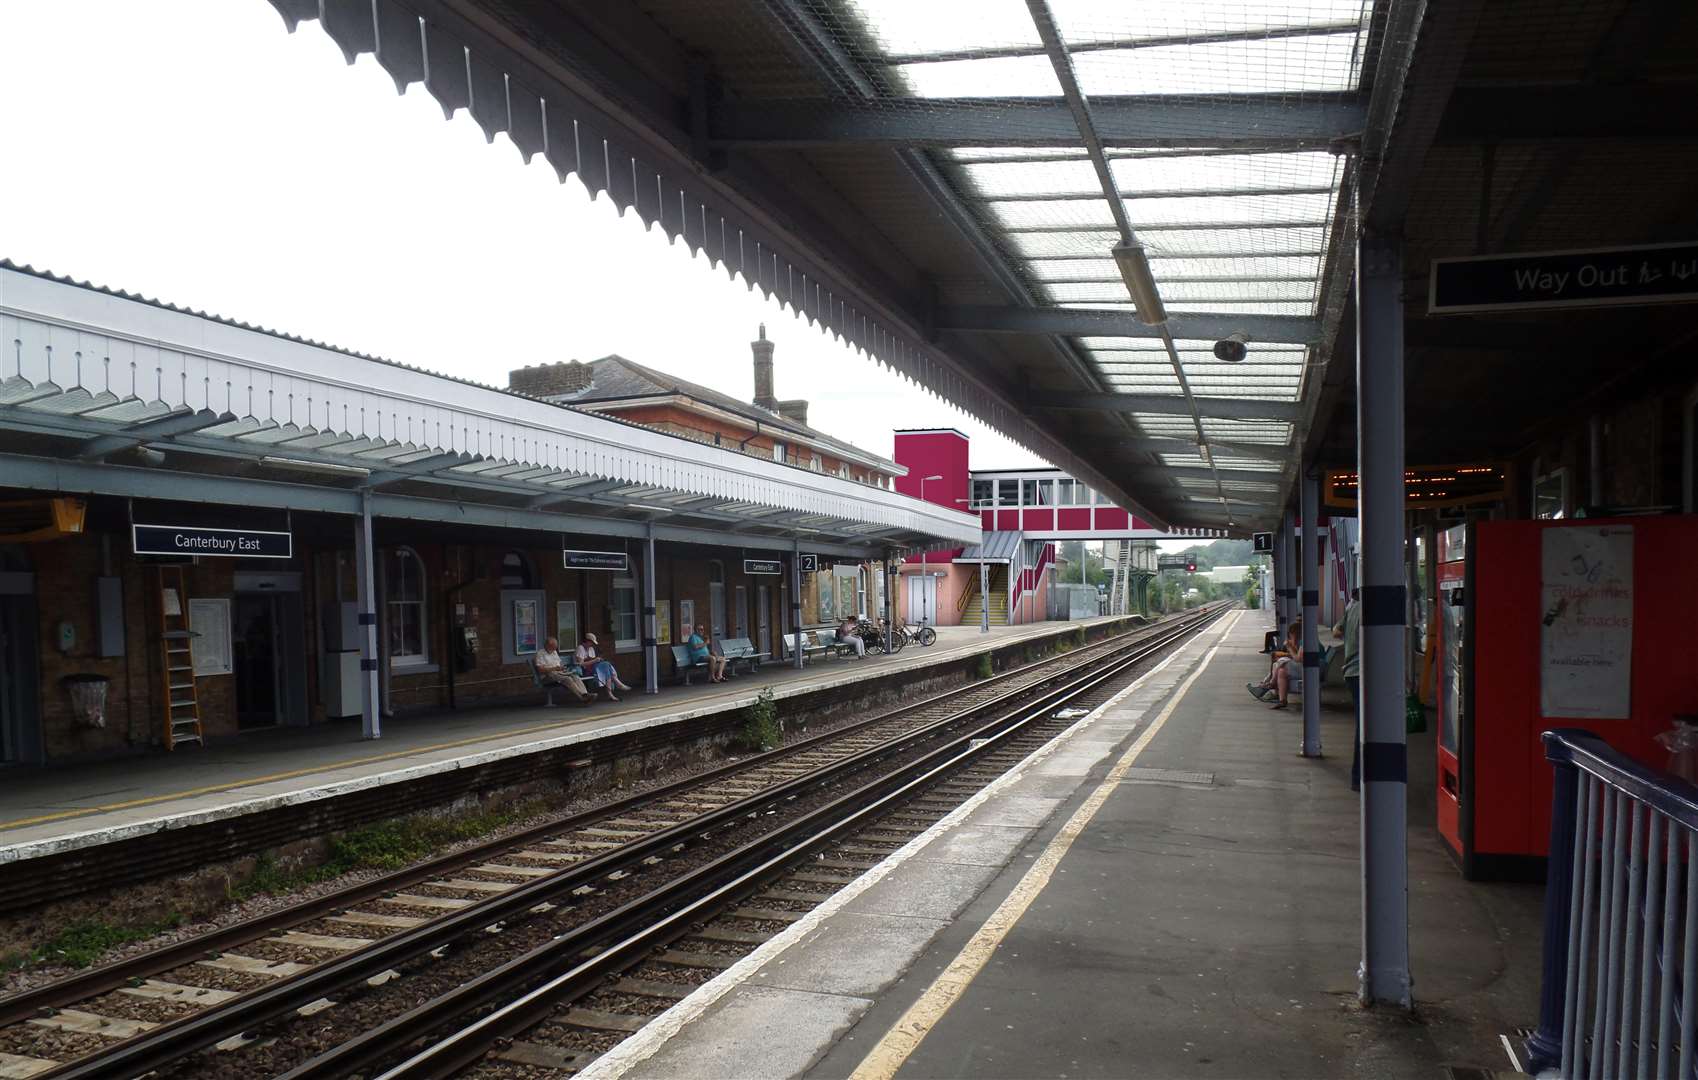 The railway line at Canterbury East station